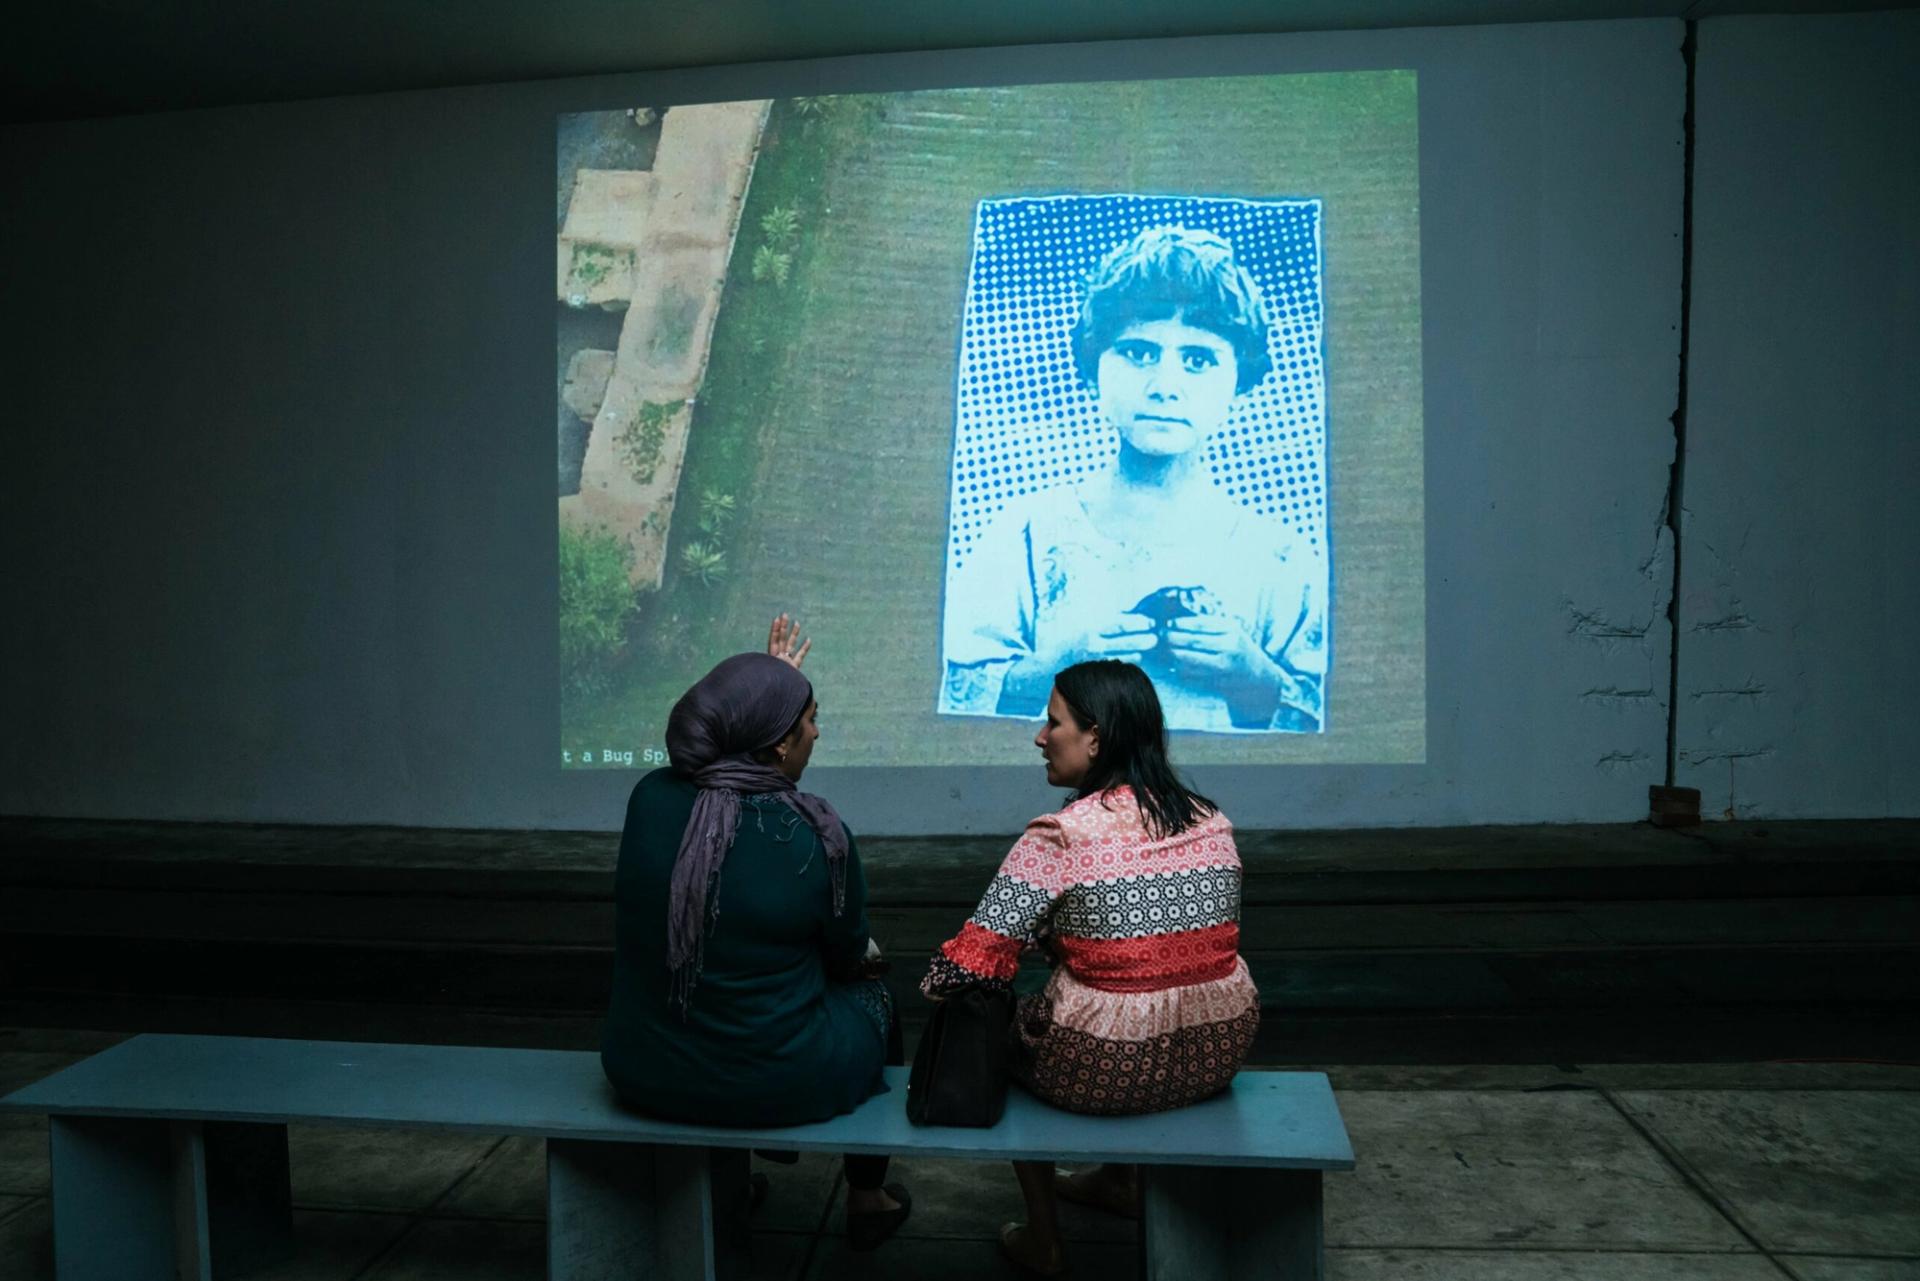 The initiative provides immigration representation, relocation assistance and employment and fellowship opportunities to Afghan artists and their families who are fleeing the Taliban

Courtesy of Artist Freedom Initiative